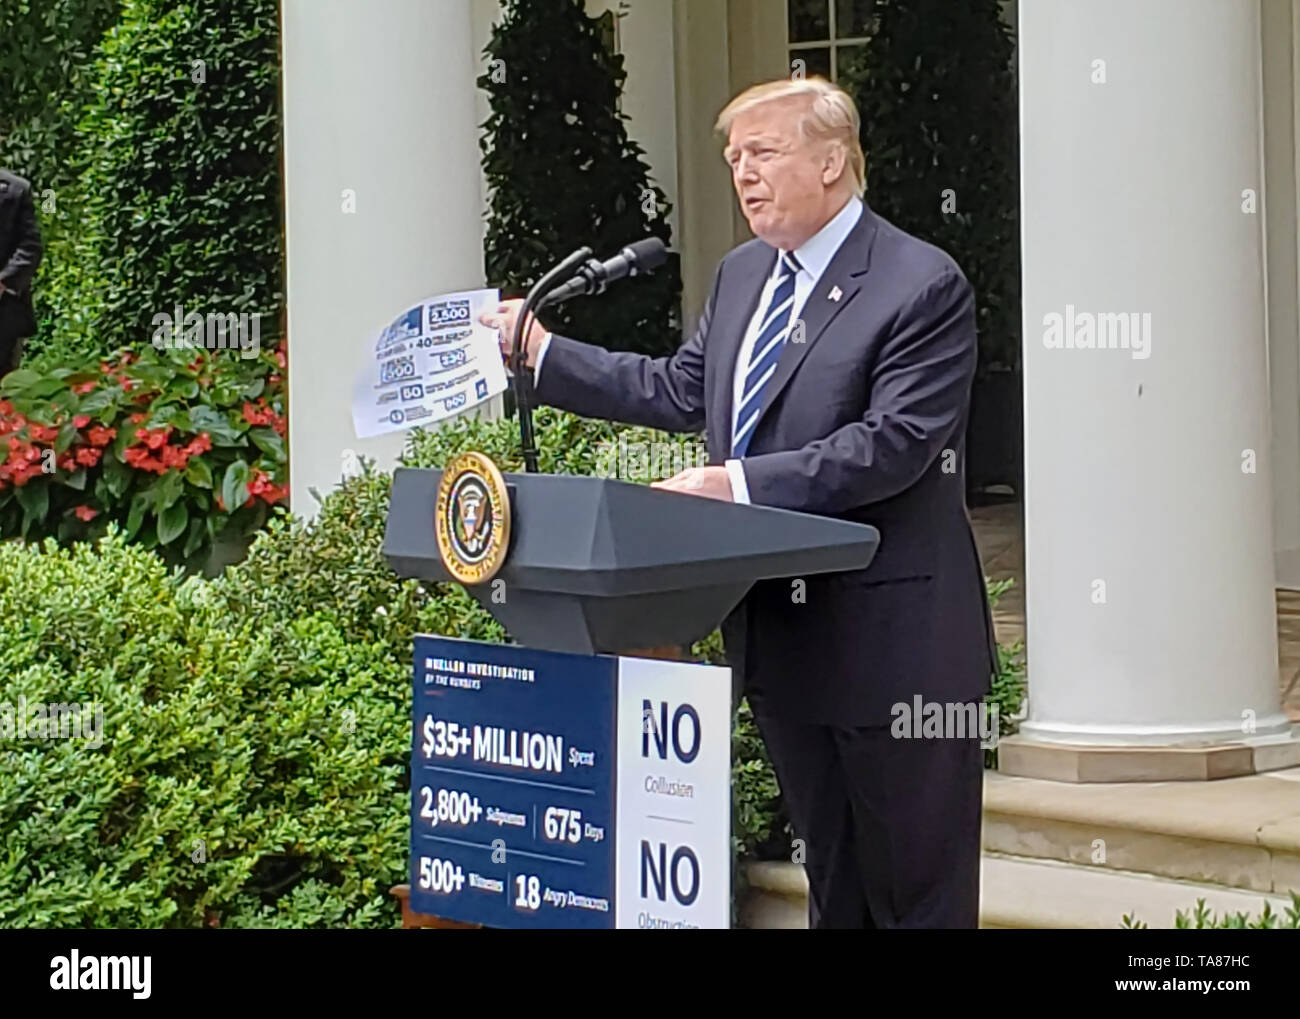 Washington DC, May 22,2019, USA: President Trump holds up a paper outlimg what he says is the finances spent on the Mueller report which he considers  Stock Photo